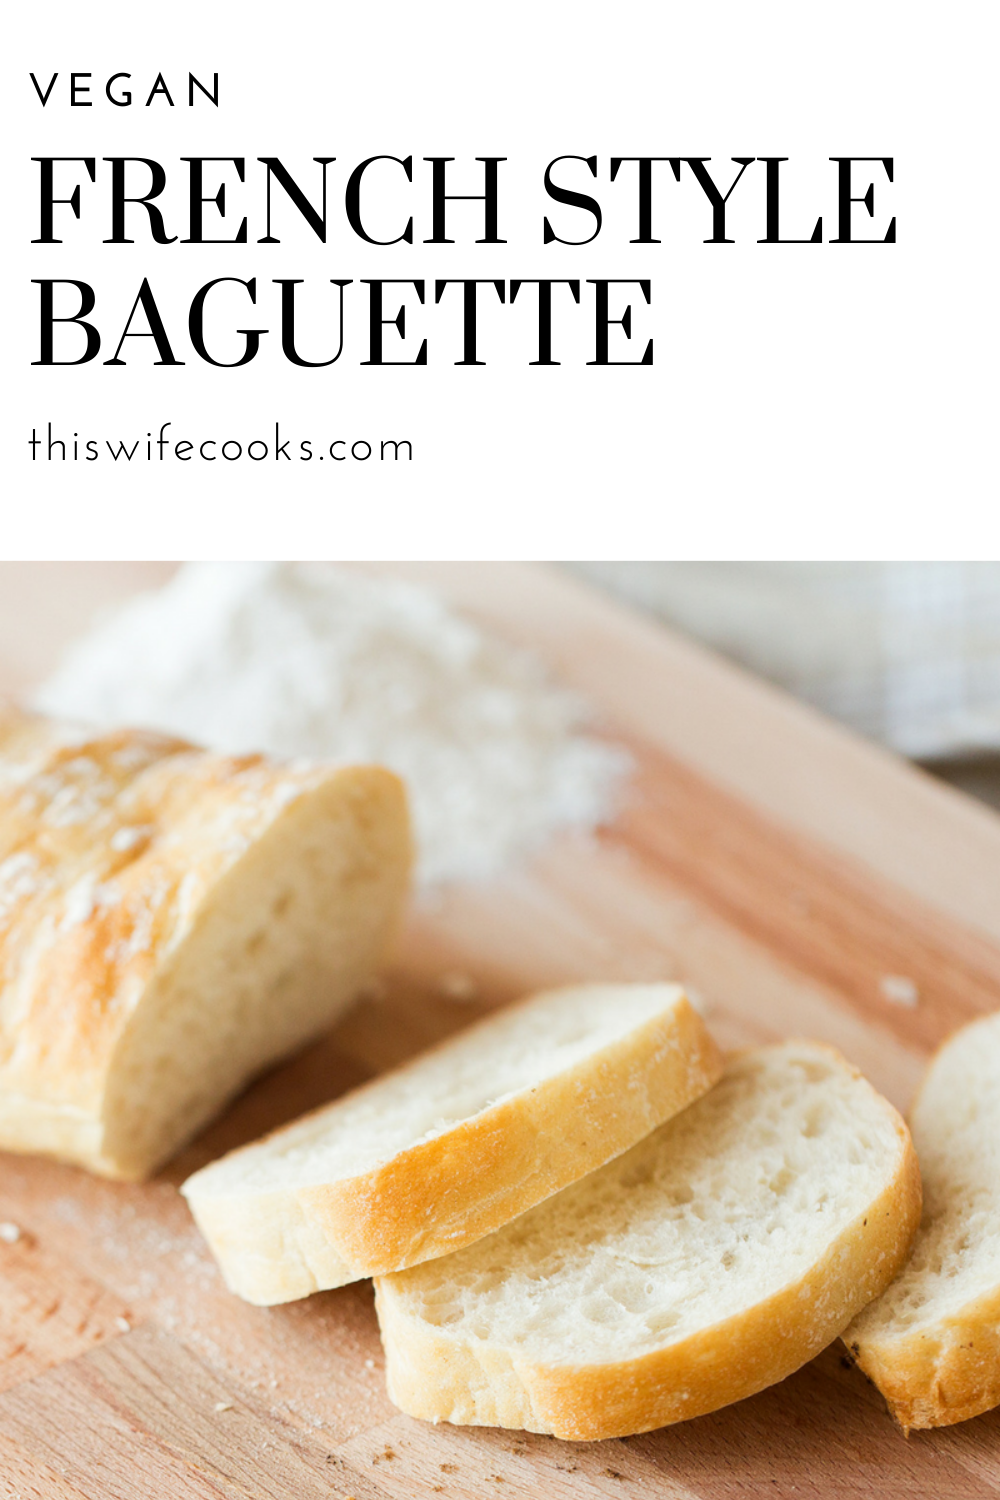 A refreshingly easy, warm and crusty, addition to your soup or pasta night! Yields two loaves. via @thiswifecooks